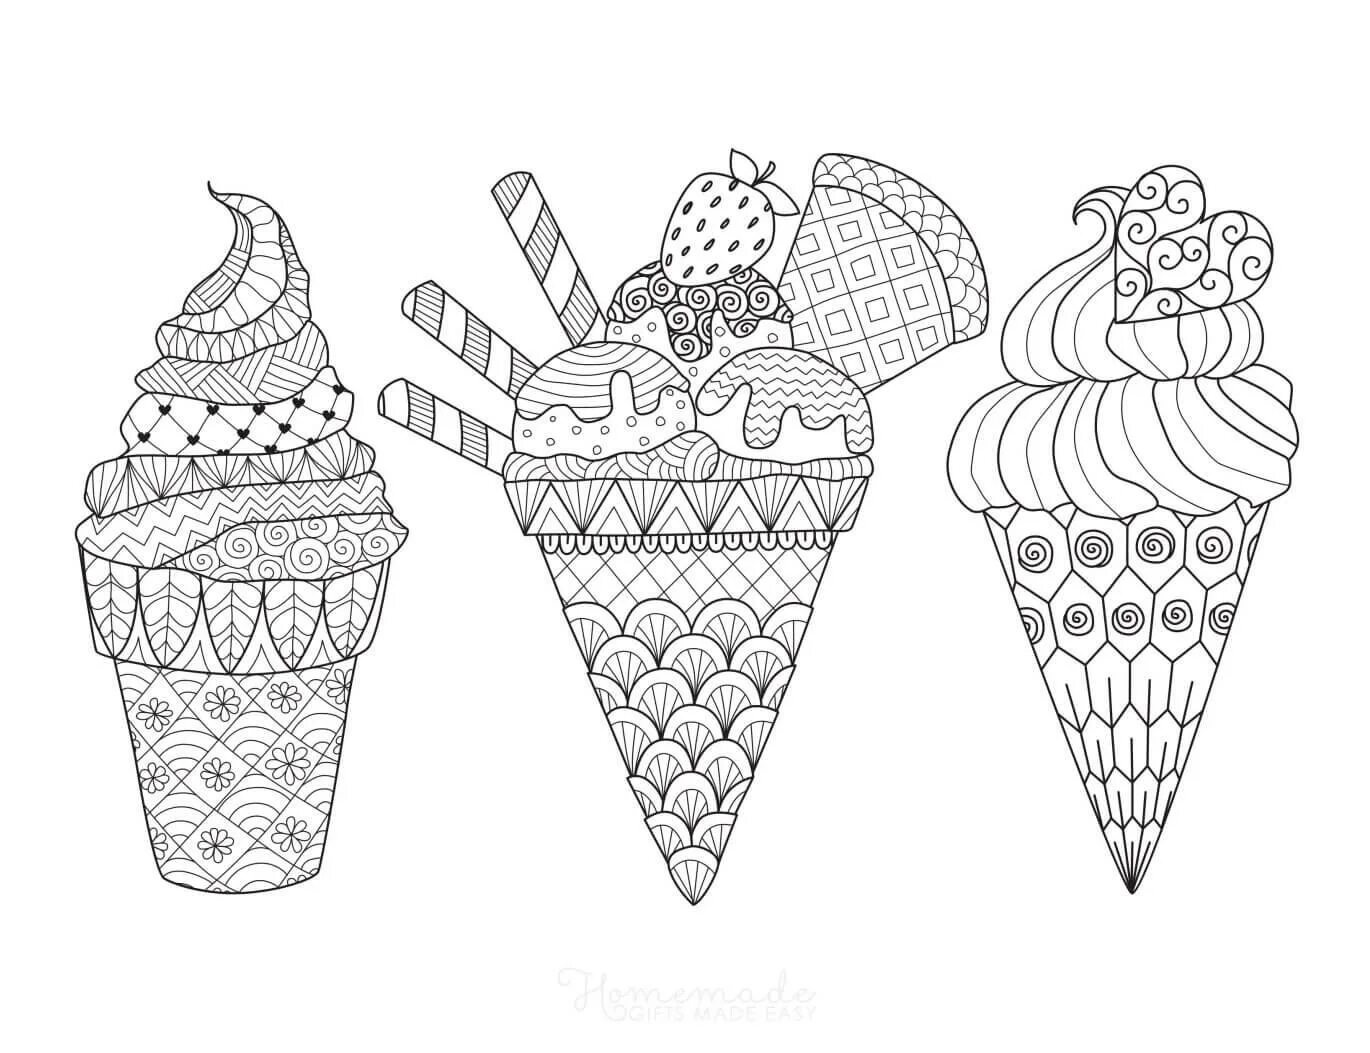 Soothing anti-stress coloring book with ice cream